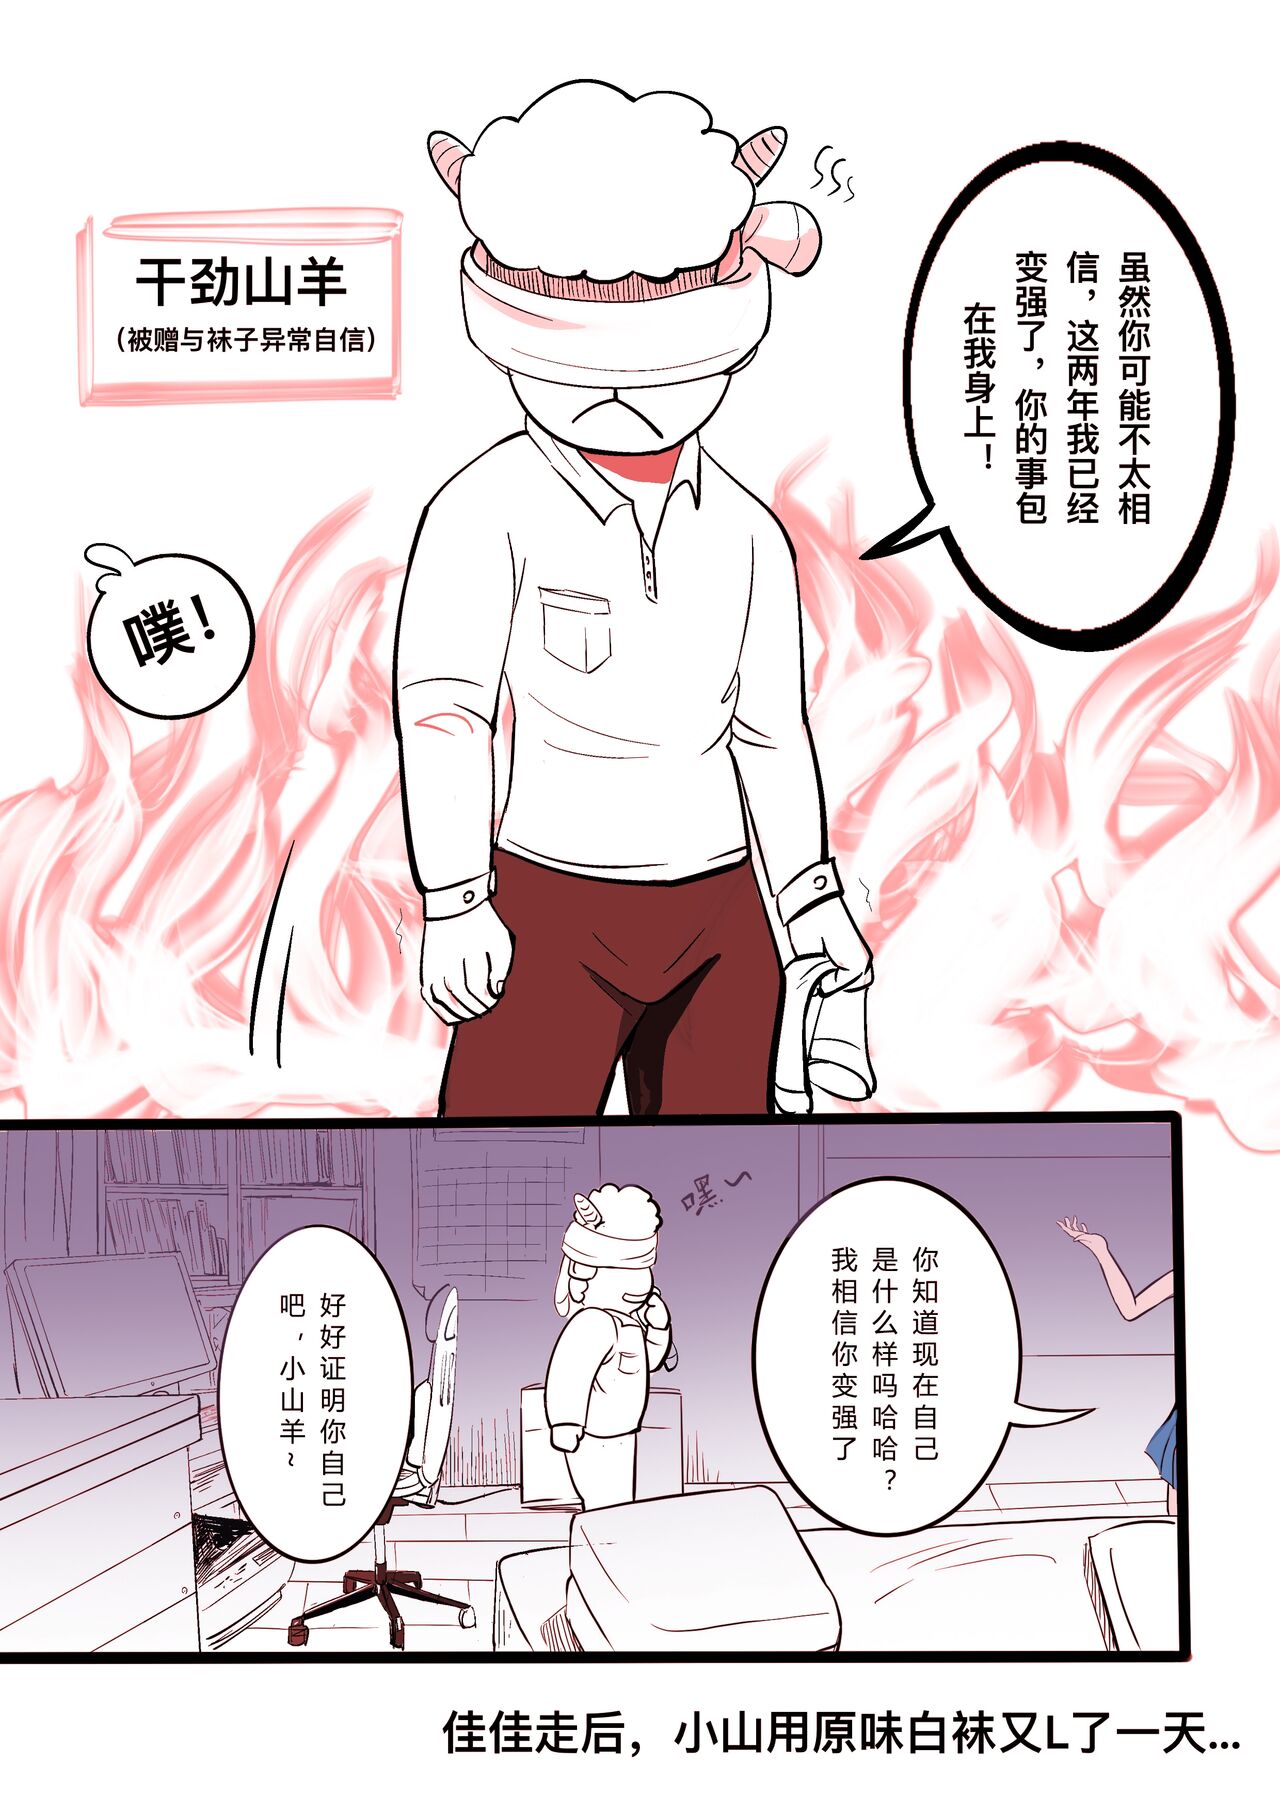 [Minworld] GOAT-goat Ⅰ special chapter [CHINESE] (full colour) 